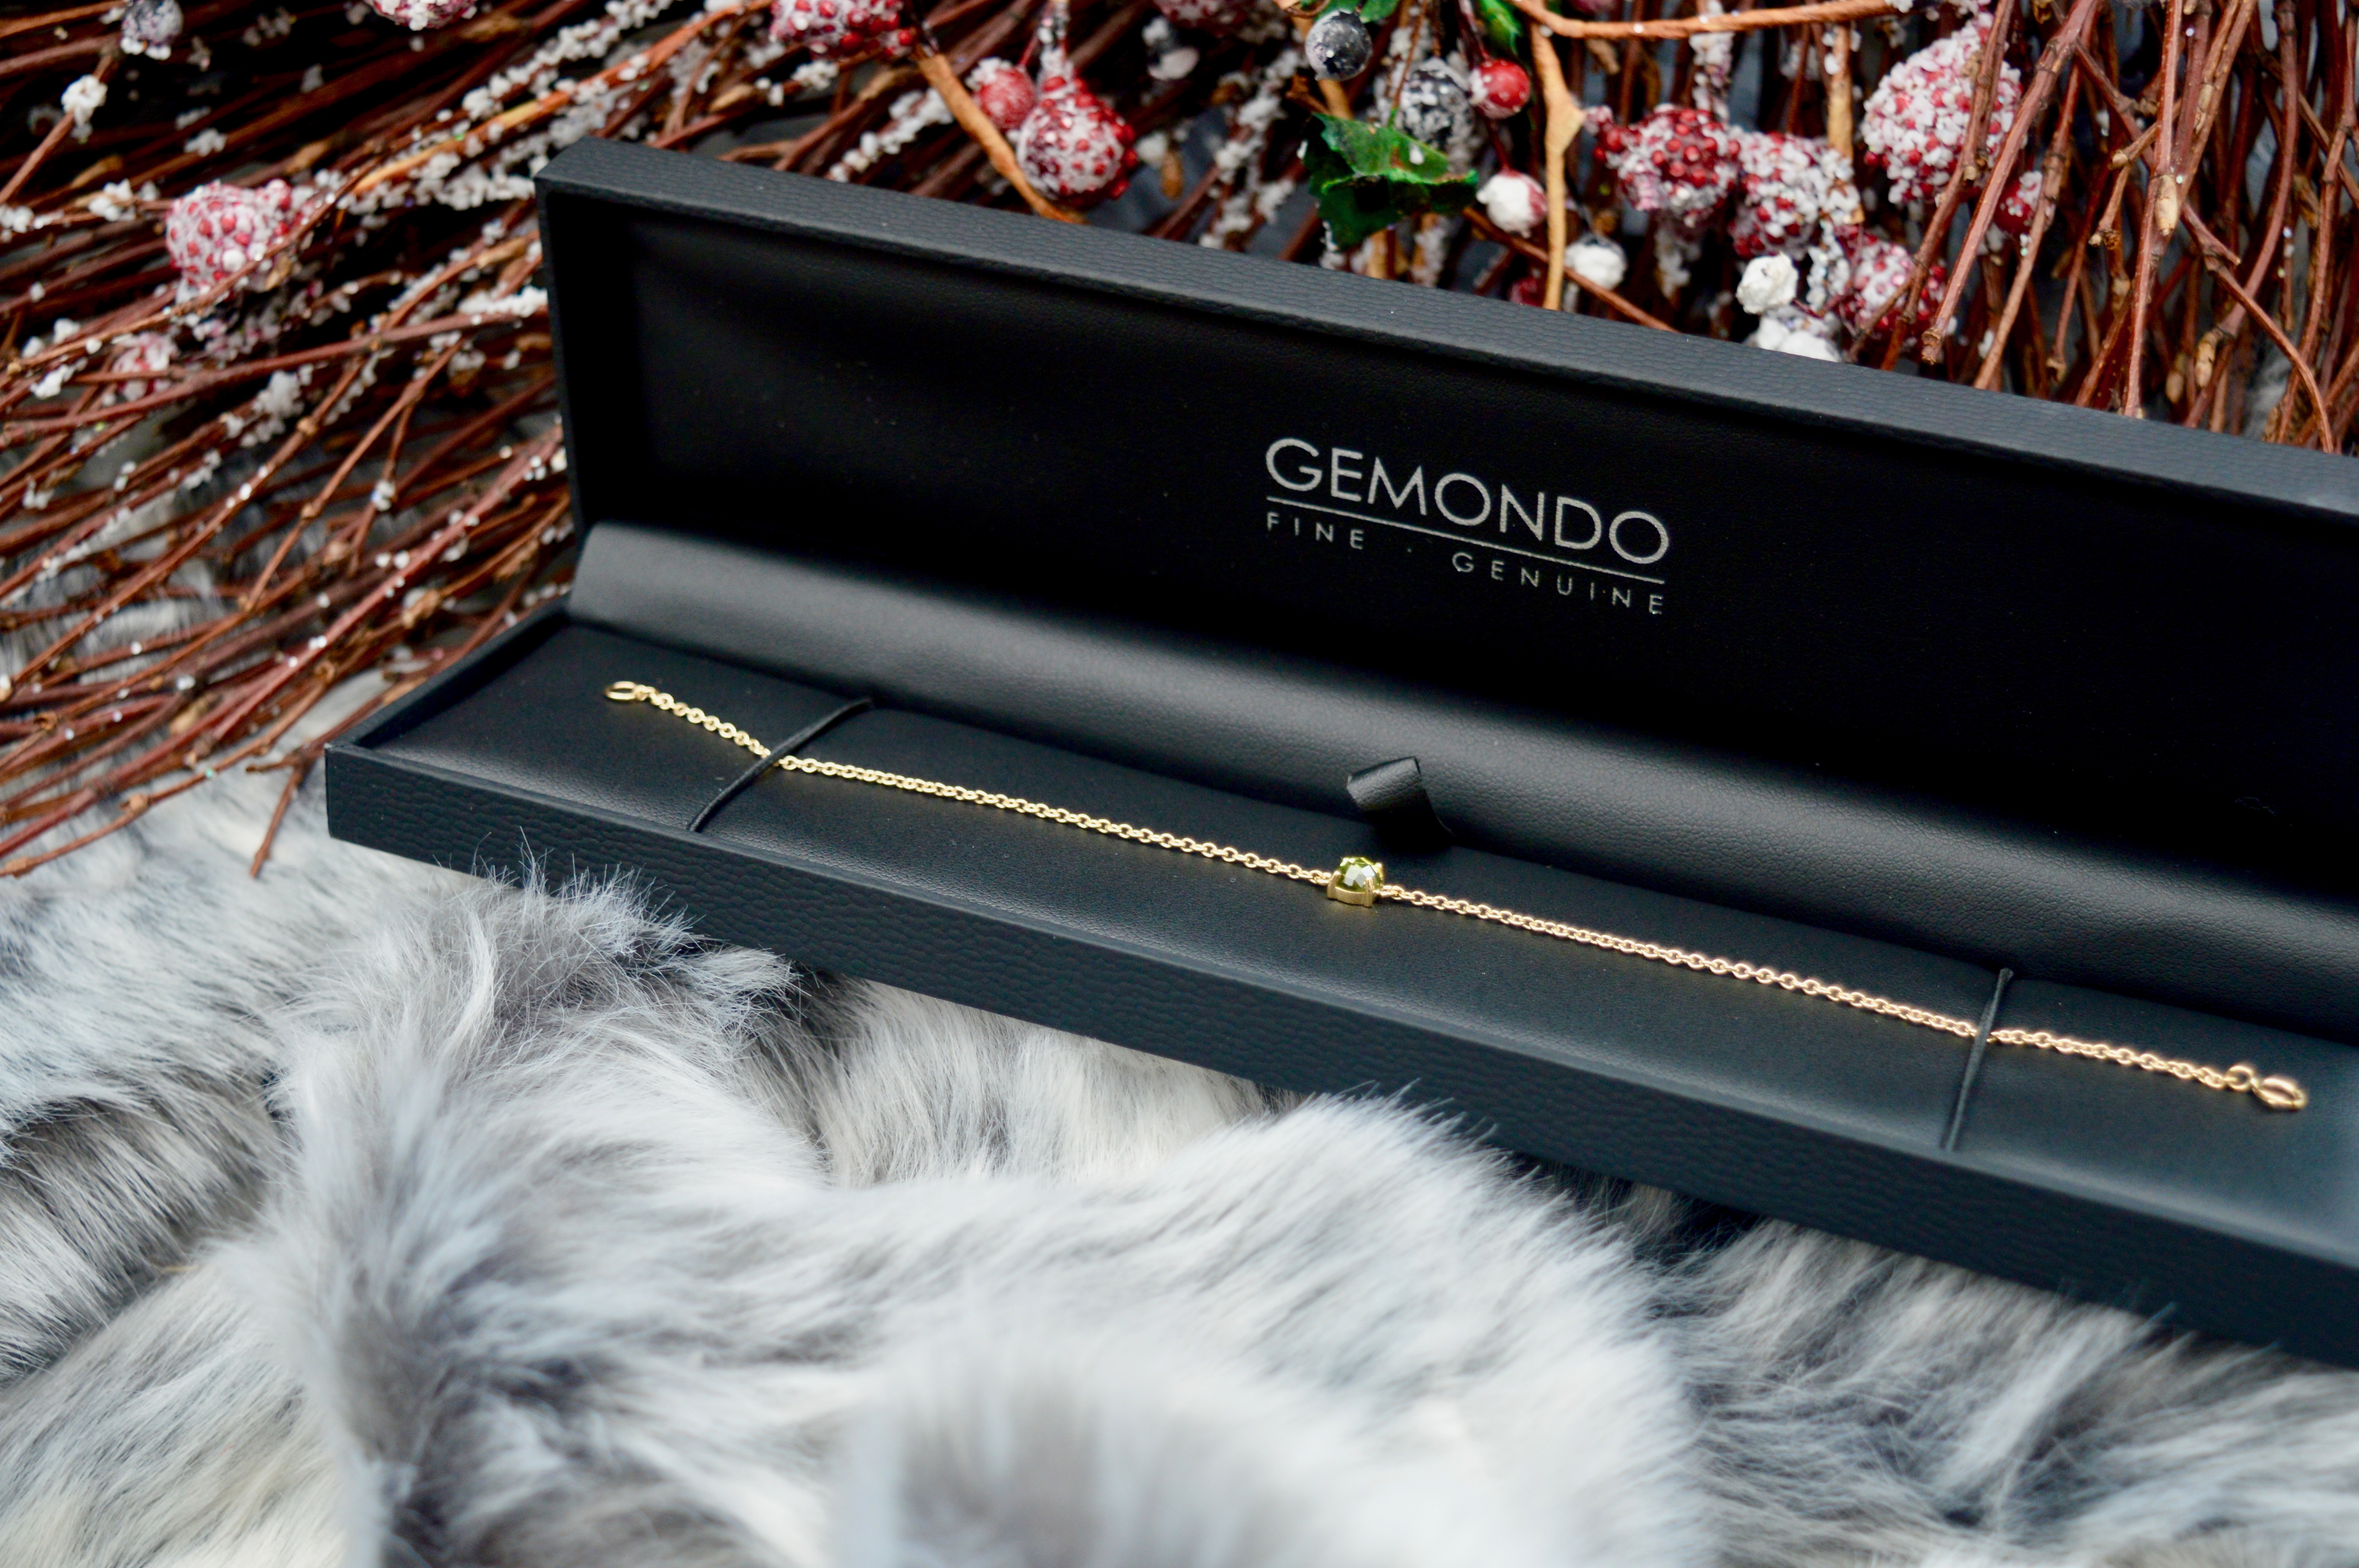 Gemondo Gold and Peridot August Birthstone Bracelet | Memorable Gift | Christmas Gift Guide - What to buy your Grandma | Elle Blonde Luxury Lifestyle Destination Blog